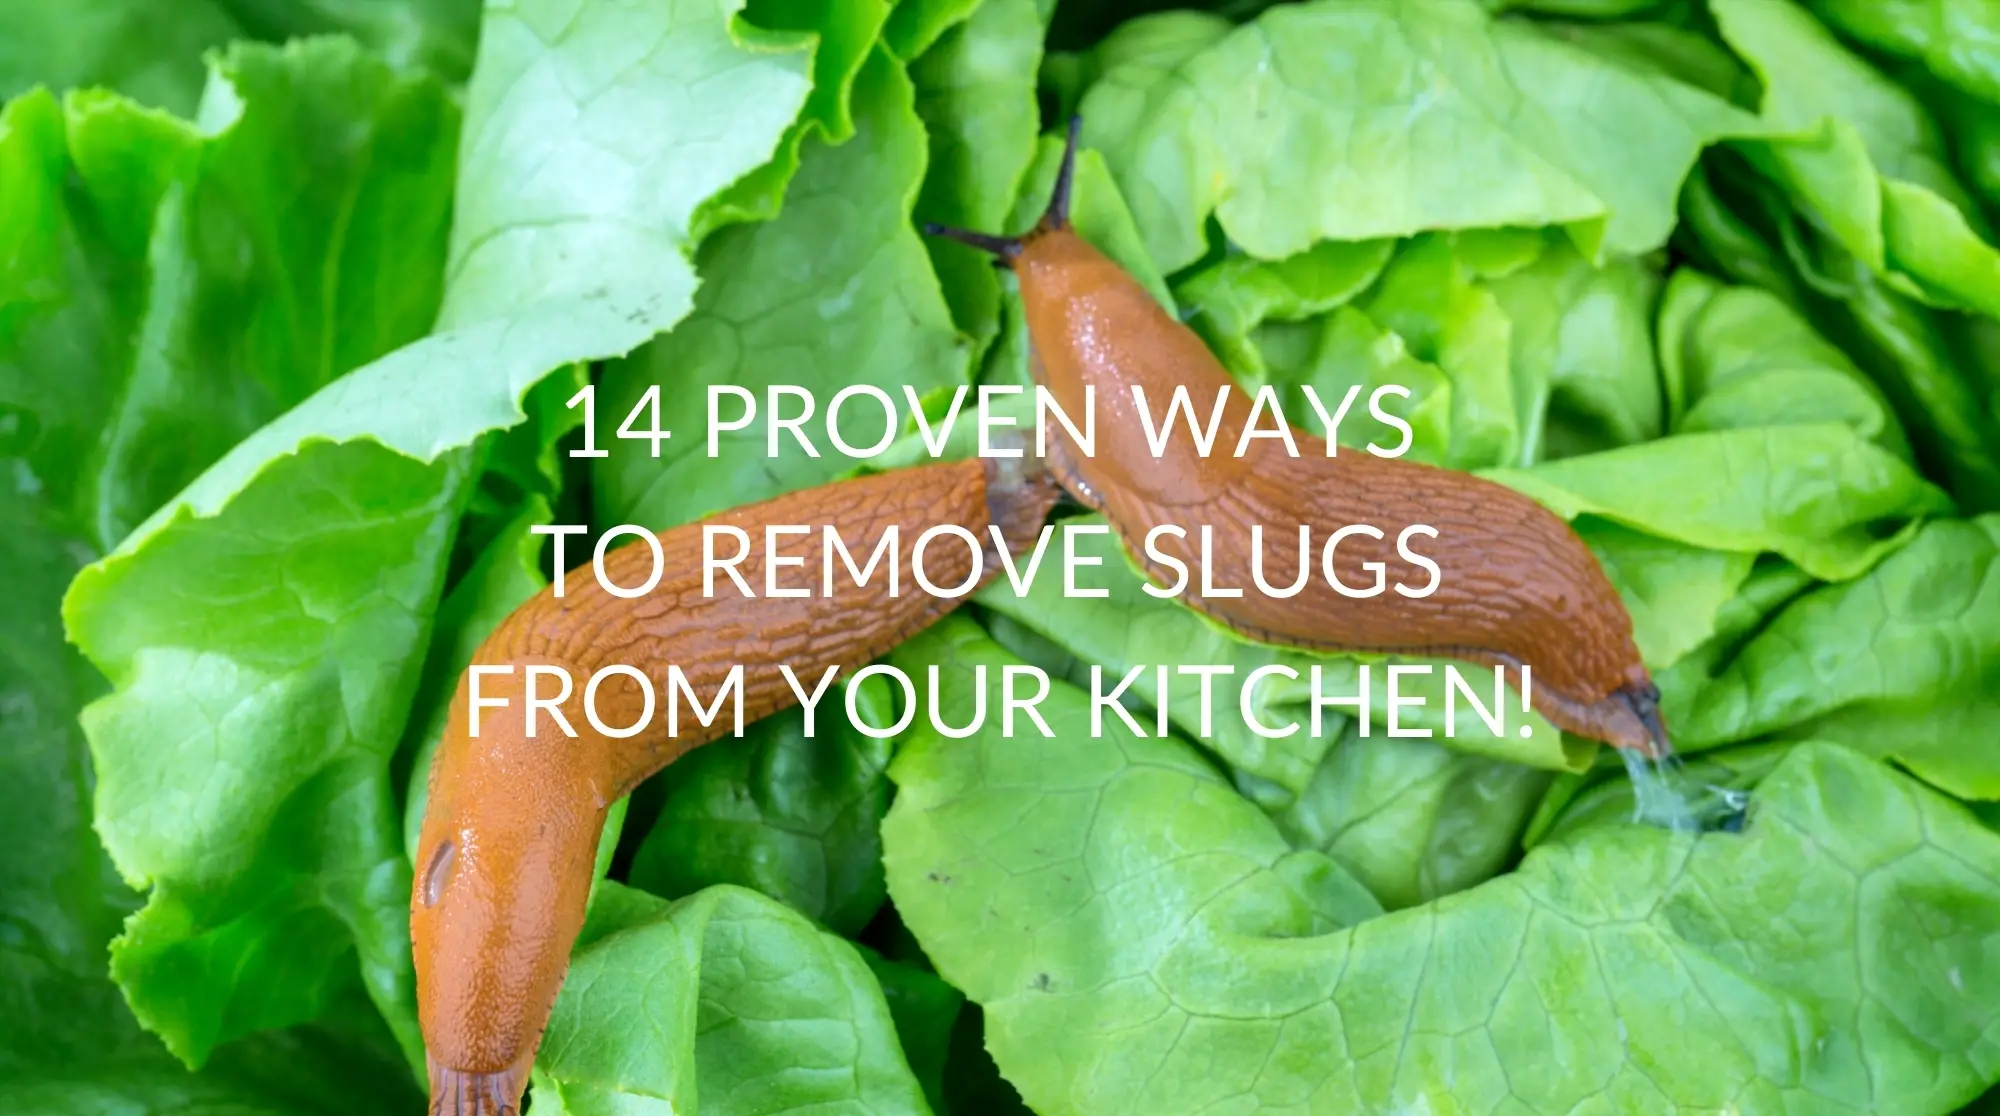 14 Proven Ways To Remove Slugs From Your Kitchen!